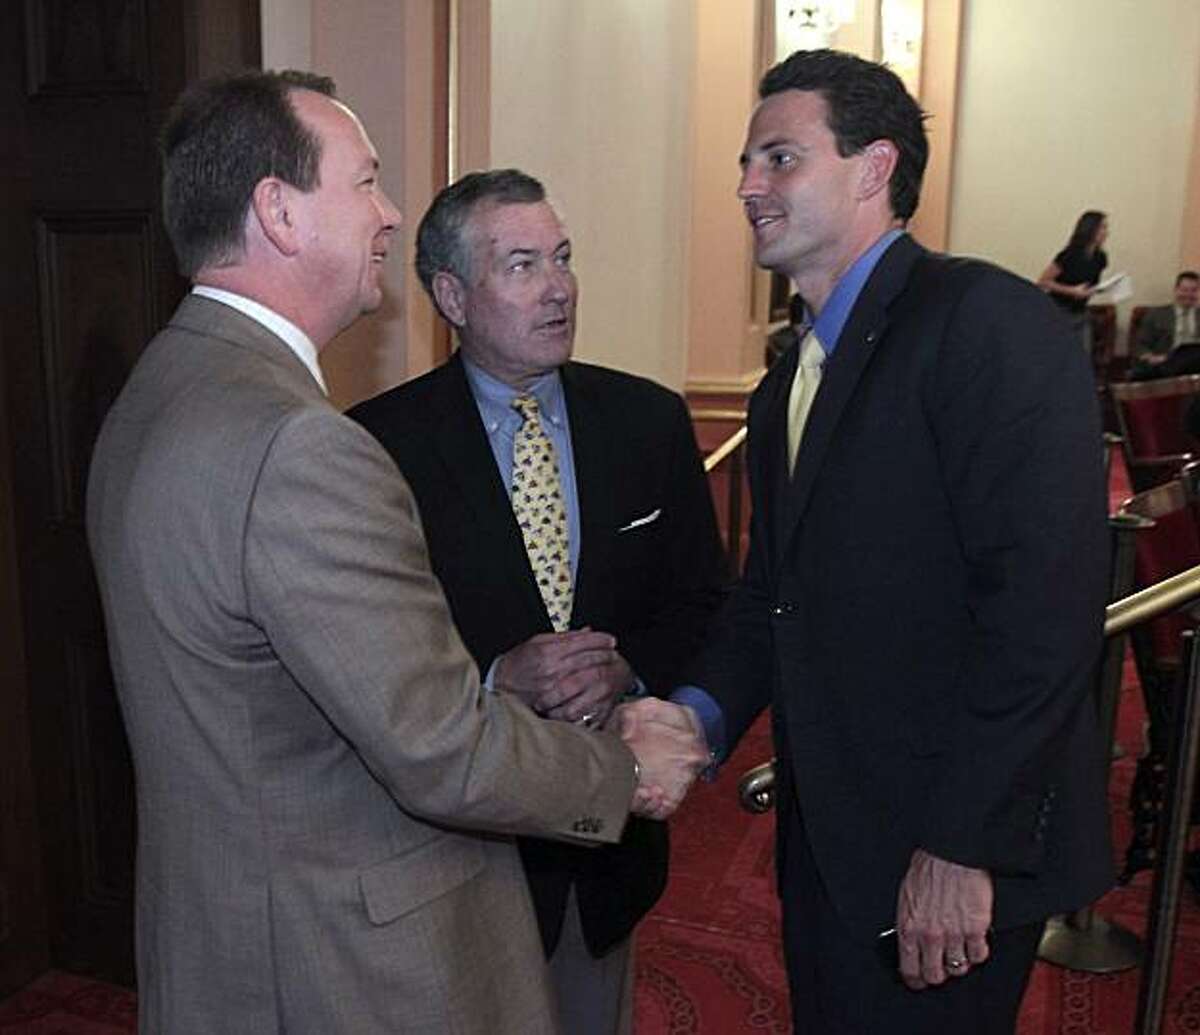 Assemblyman Nathan Fletcher, R-San Diego, right, and Sen. Minority Leader Dennis Hollingsworth, R-Murietta, left, shakes hands on the passage of Fletcher's measure to increase the penalties for convicted child molesters was approved by the Senate, at theCapitol in Sacramento, Calif., Tuesday, Aug. 24, 2010. The bill, known as Chelsea's Law would reserve life-without parole for adult predators who kidnap, drug, bind, torture or use a weapon while committing a sex crime against a child. The bill was named after 17-year-old Chelsea King , who was murdered in San Diego County by a convicted child molestor out on parole earlier in the year. Also seen is Assembly Minority Leader Martin Garrick, R-Solana Beach.